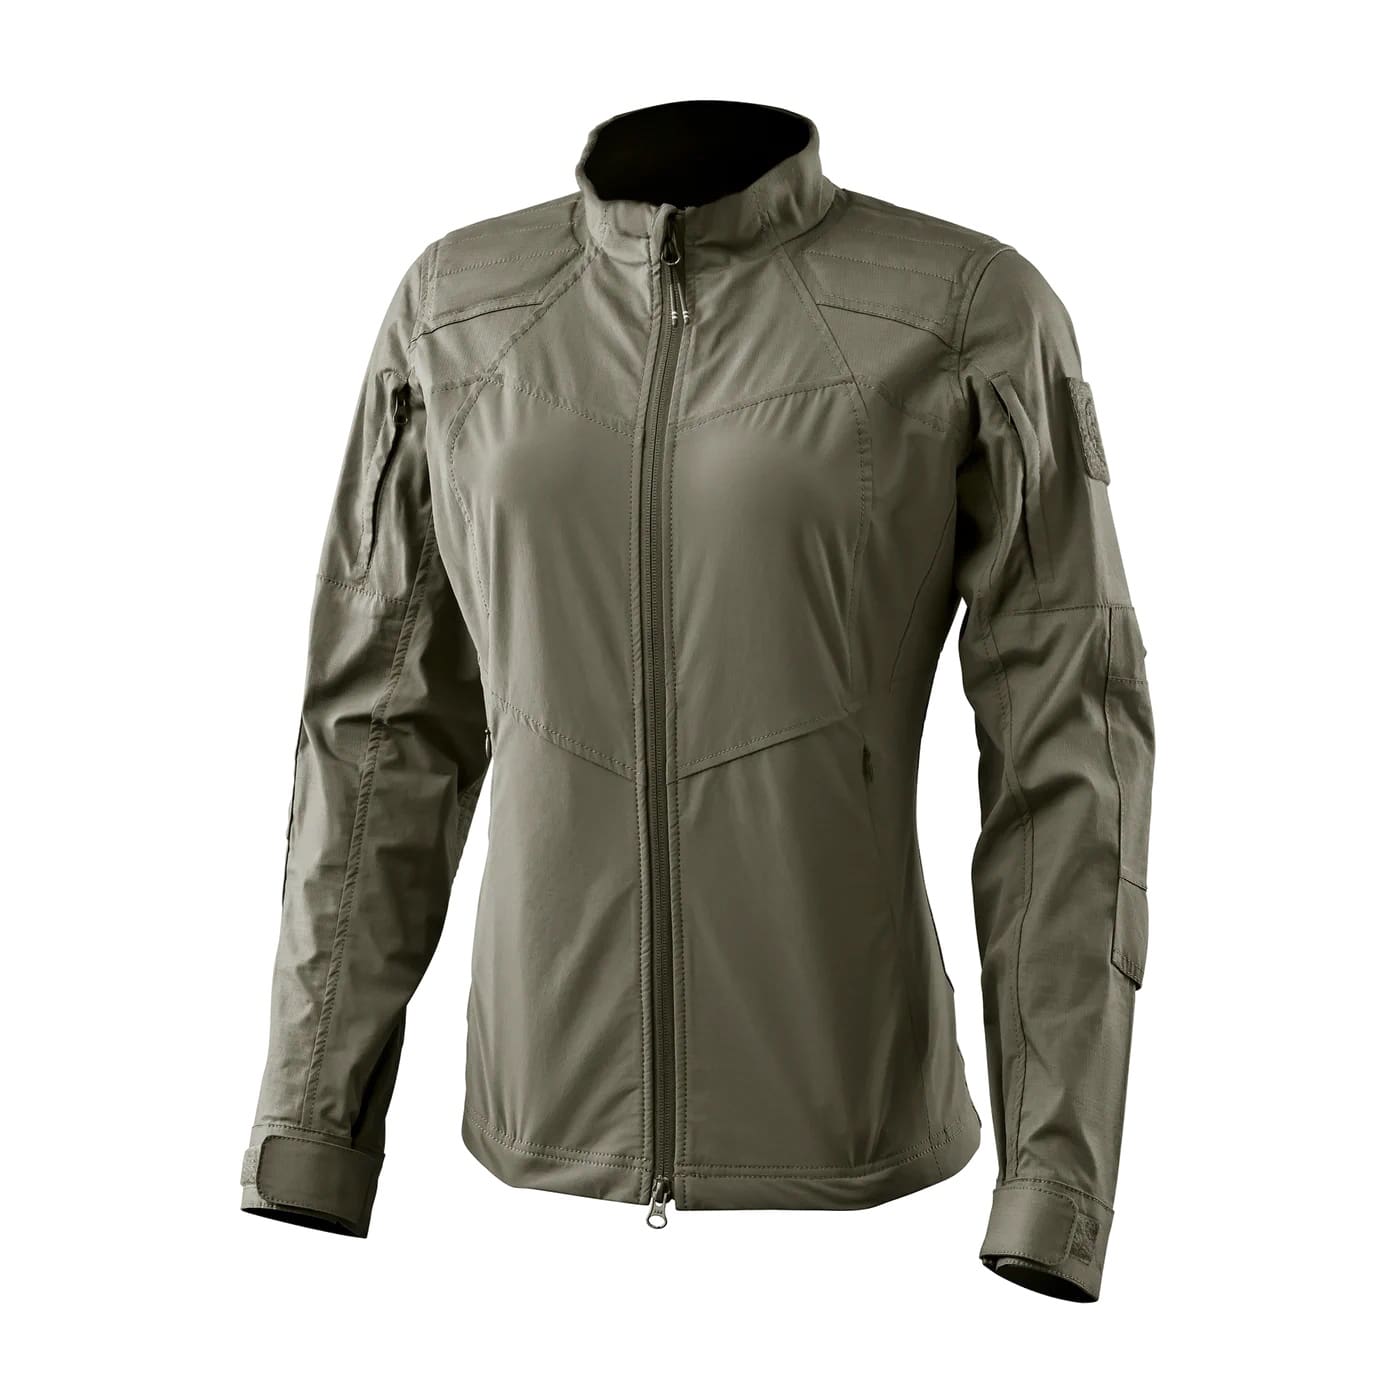 The Tactical Combat Gear Review Berettas Womens Clothing Line